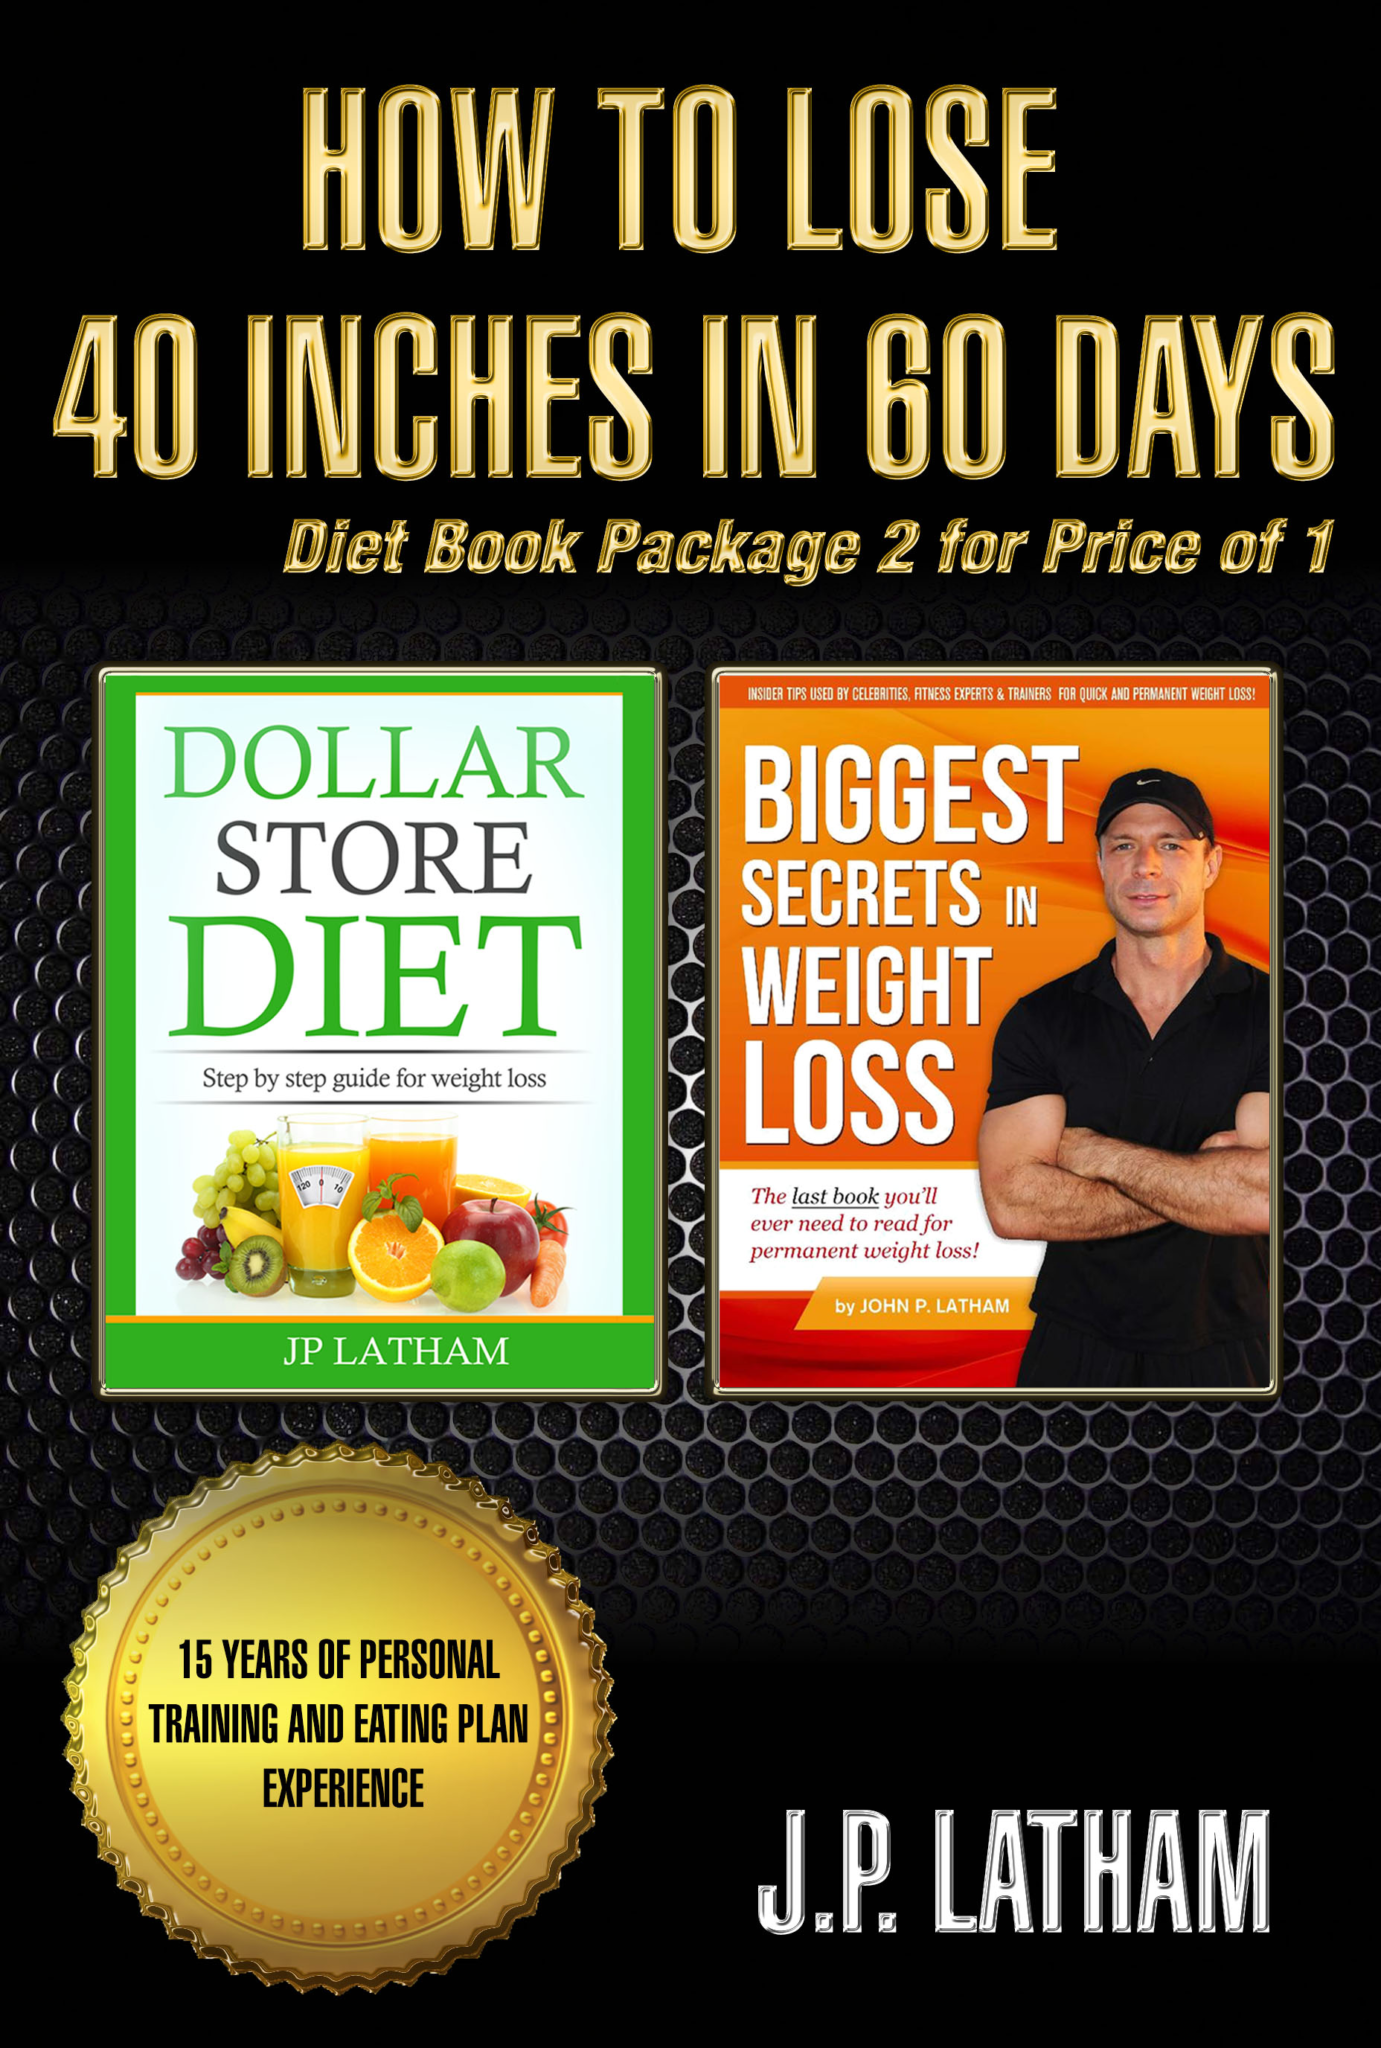 FREE: How to Lose 40 inches in 60 days by JP Latham